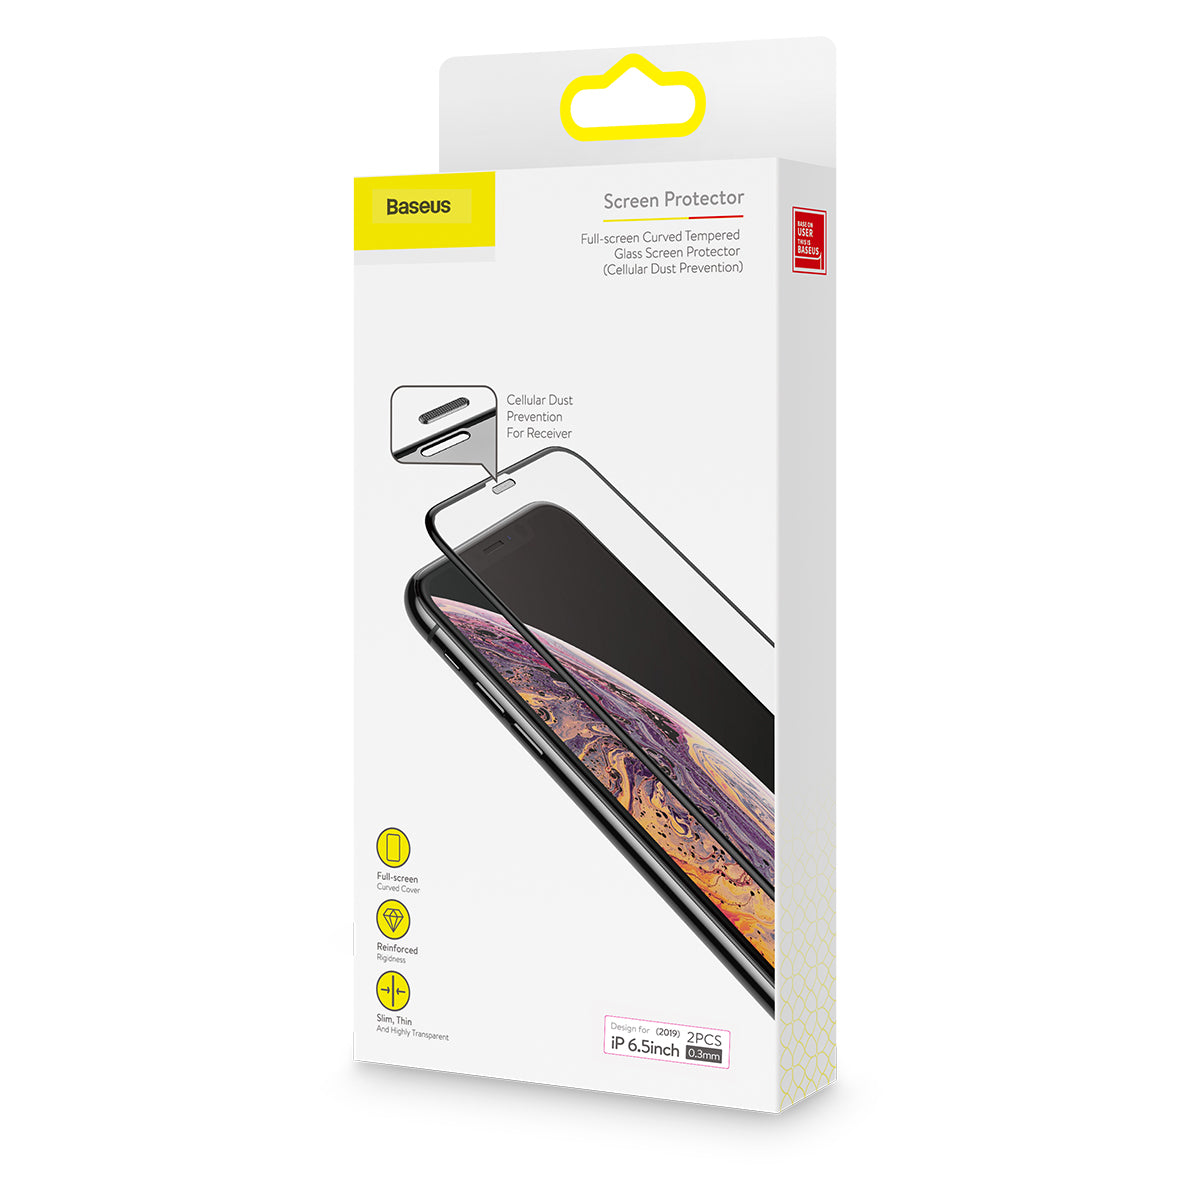 BASEUS Full-screen curved tempered glass screen protector (cellular dust prevention) for iPhone 11 Pro max / 11 Pro / 11 / XS Max / XS / X / XR